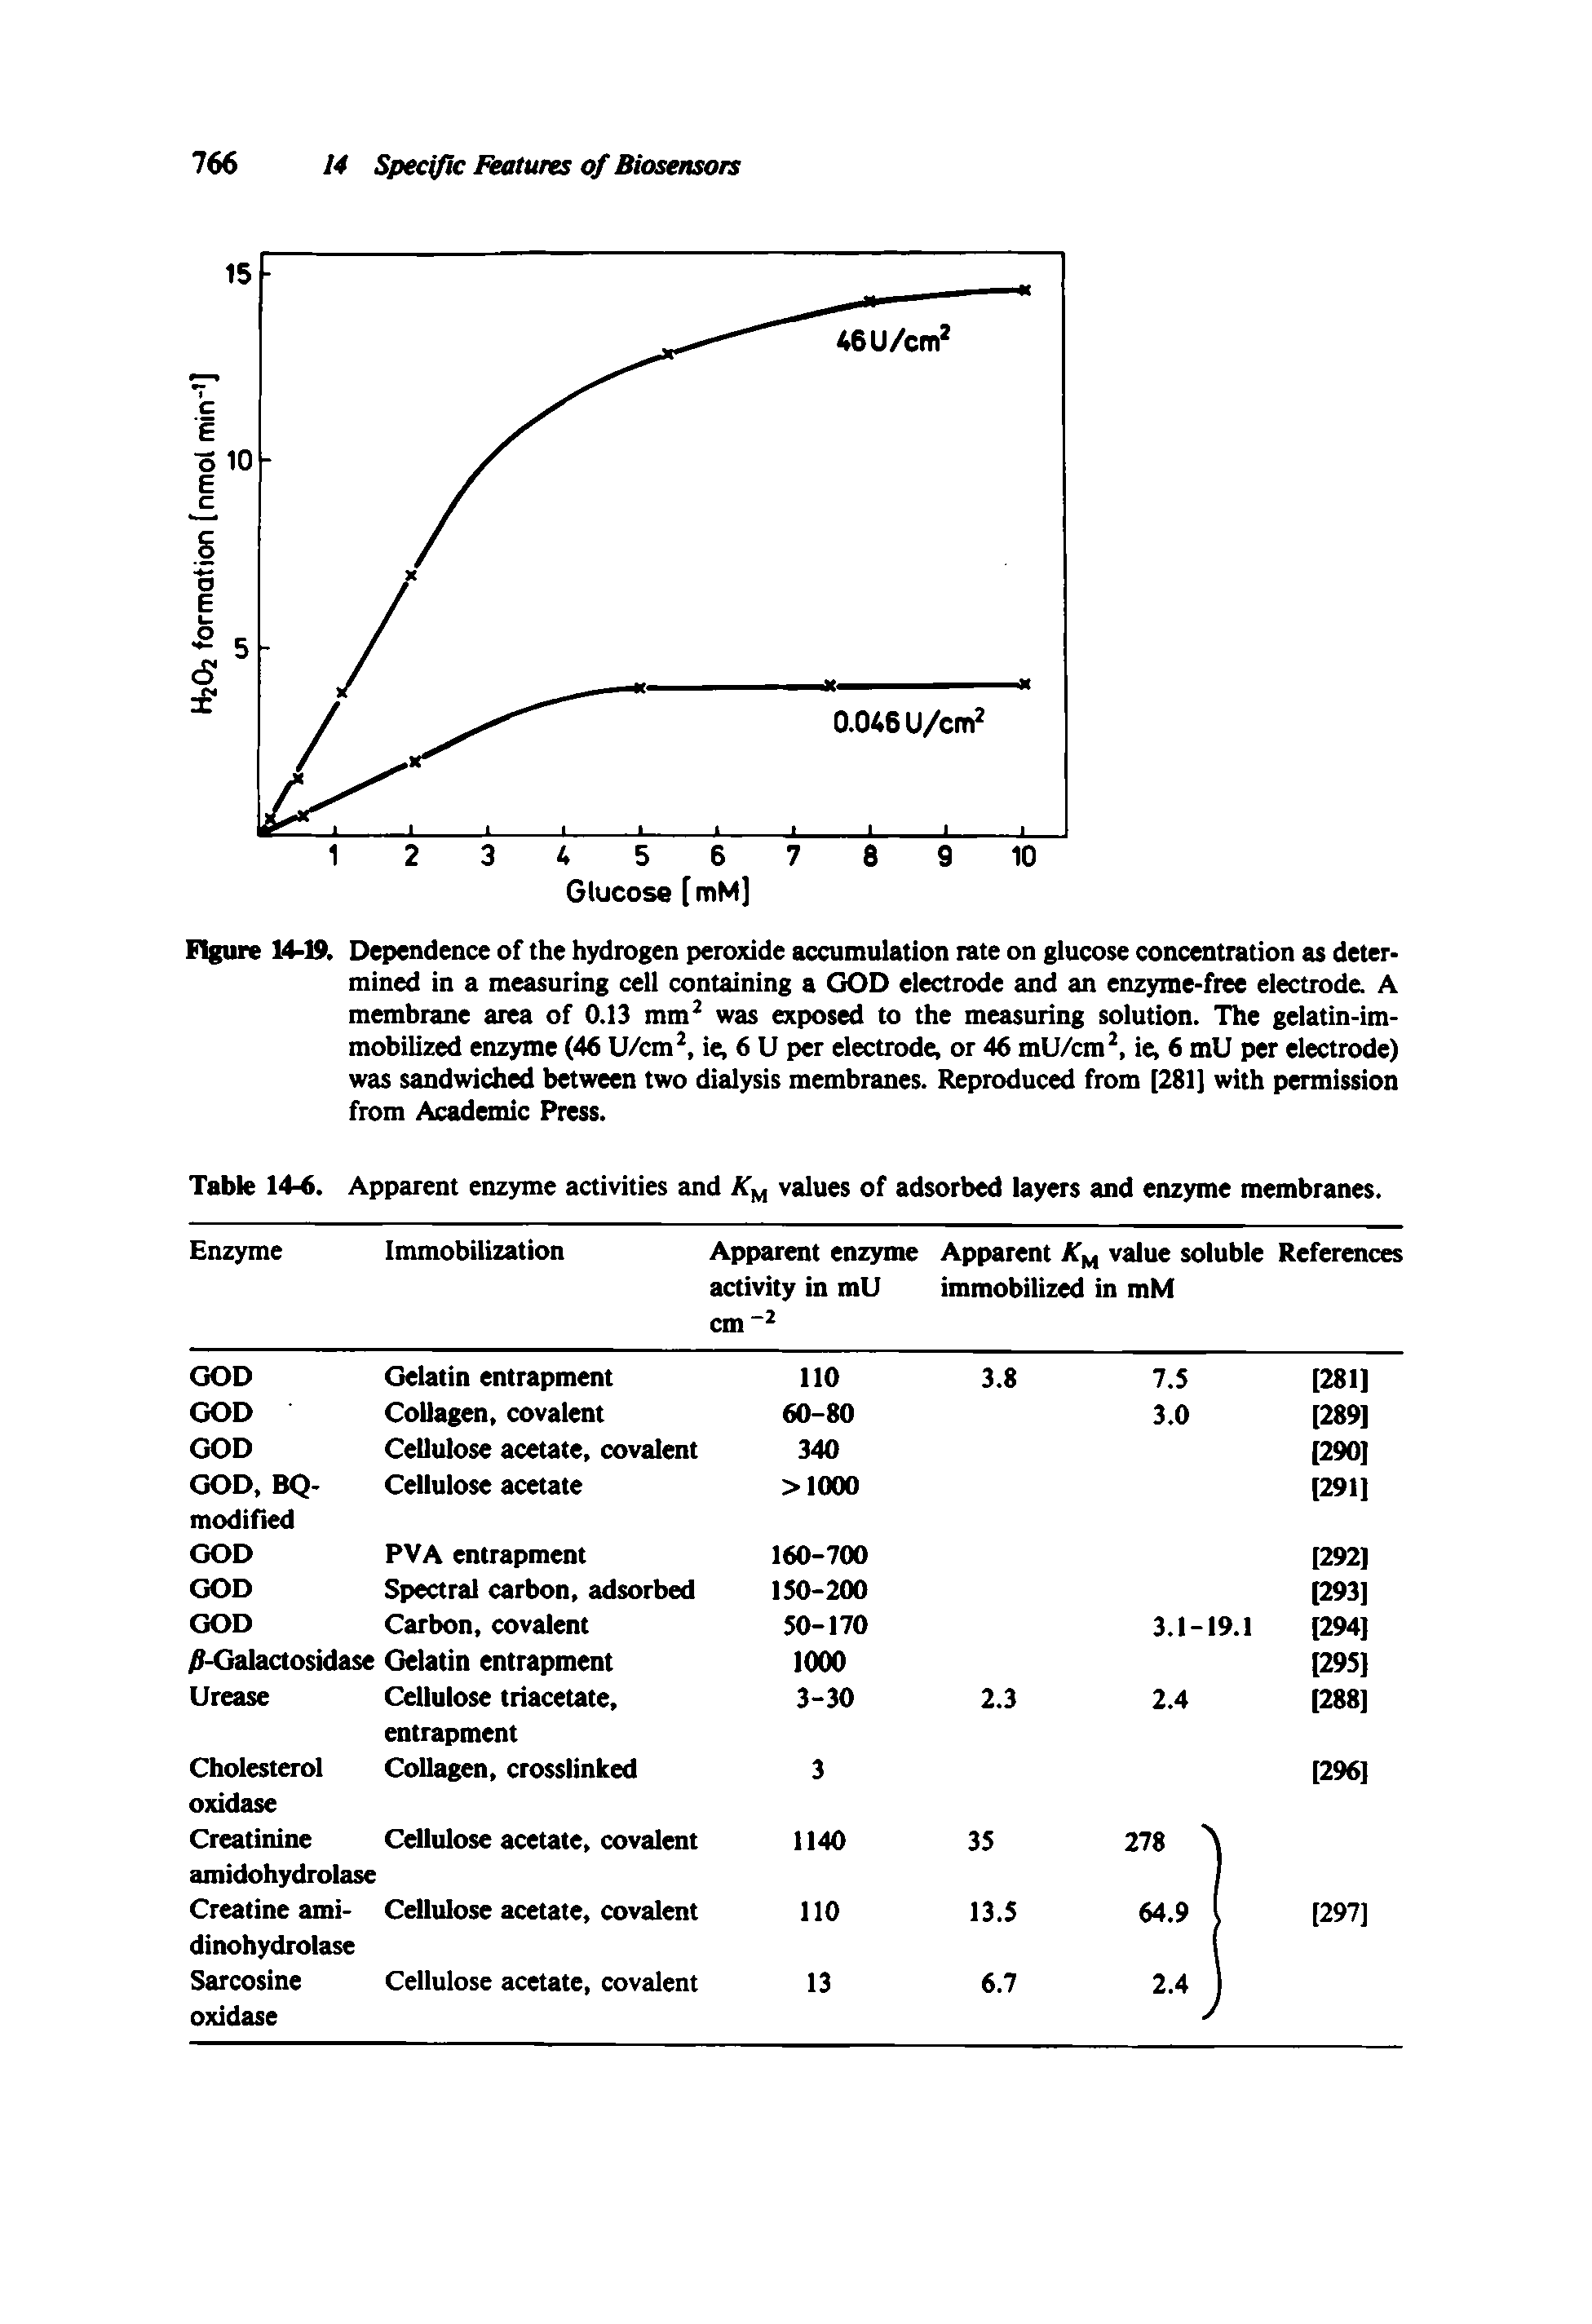 Figure 14-19. Dependence of the hydrogen peroxide accumulation rate on glucose concentration as determined in a measuring cell containing a GOD electrode and an enzyme-free electrode. A membrane area of 0.13 mm was exposed to the measuring solution. The gelatin-immobilized enzyme (46 U/cm, ie, 6 U per electrode, or 46 mU/cm, ie, 6 mU per electrode) was sandwiched between two dialysis membranes. Reproduced from [281] with permission from Academic Press.